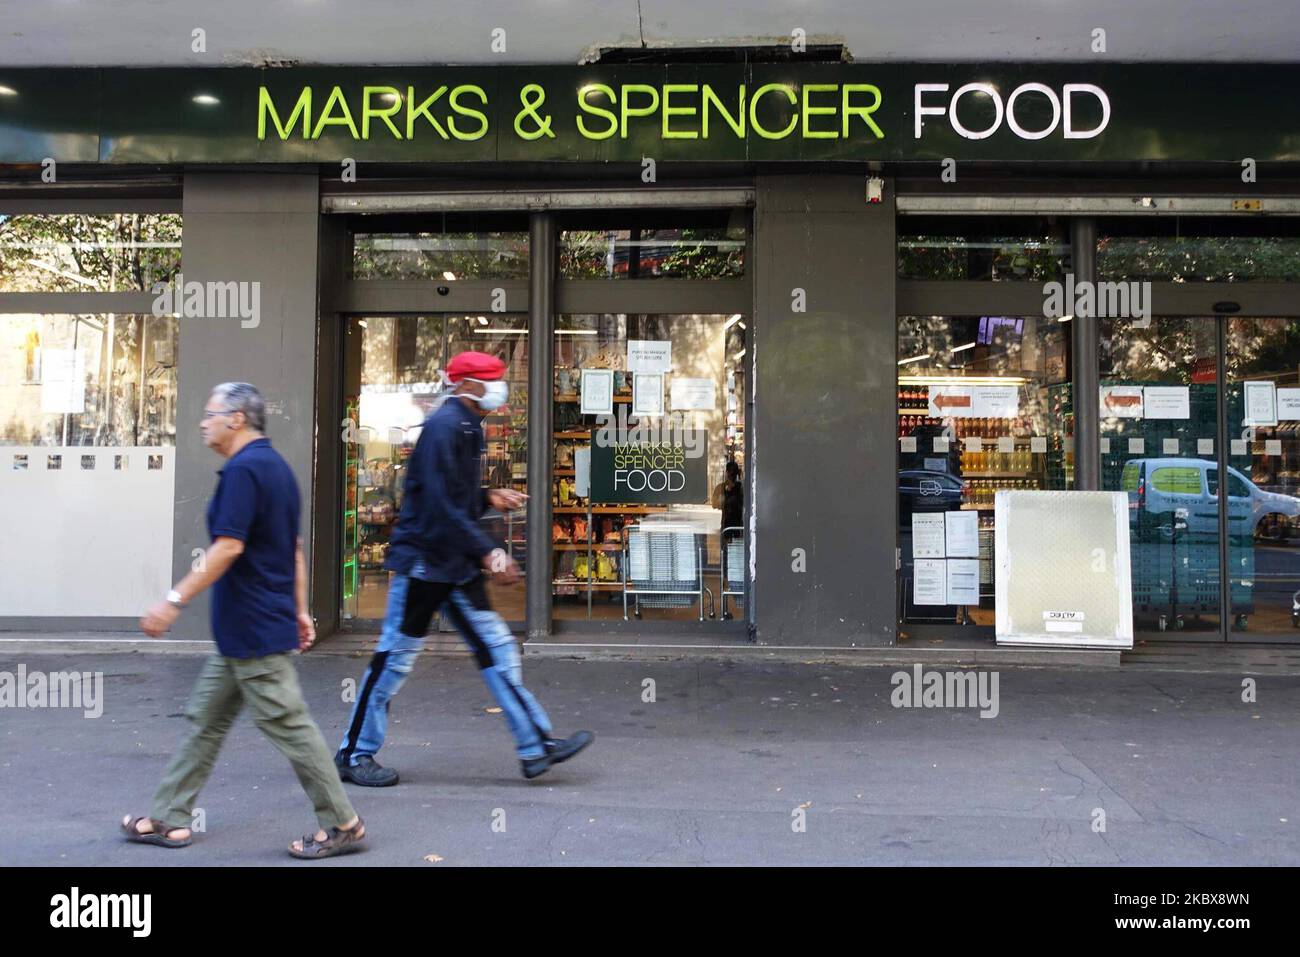 A Marks And Spencer supermarket in Paris, France on August 18, 2020. The british retail chain Marks And Spencer announced on Tuesday August 18, to cut 7,000 jobs over the next three months due to the impact of the Covid-19 pandemic and a drop in store footfall. (Photo by Adnan Farzat/NurPhoto) Stock Photo